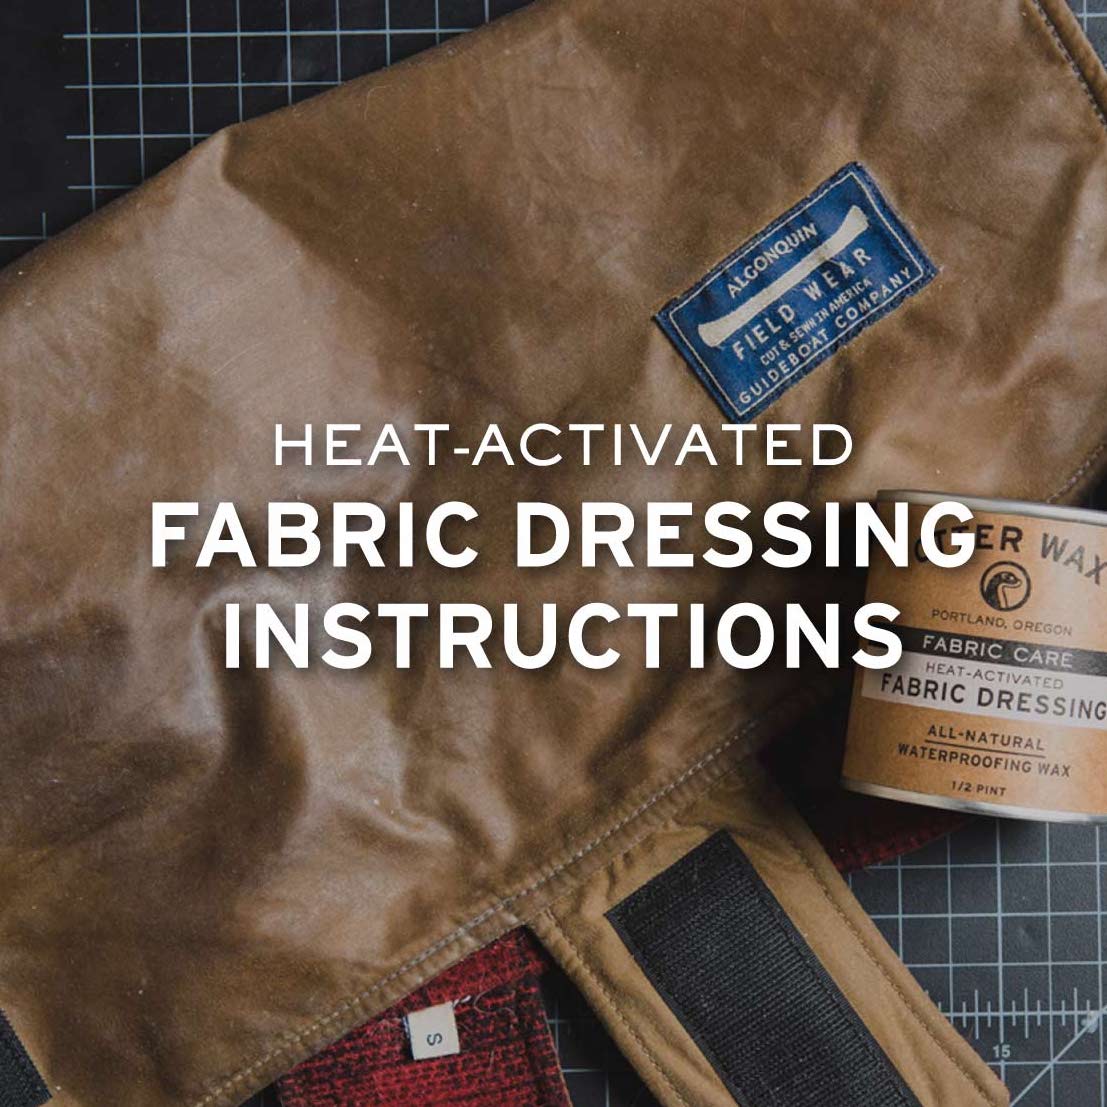 How To Apply Otter Wax Heat-Activated Fabric Dressing